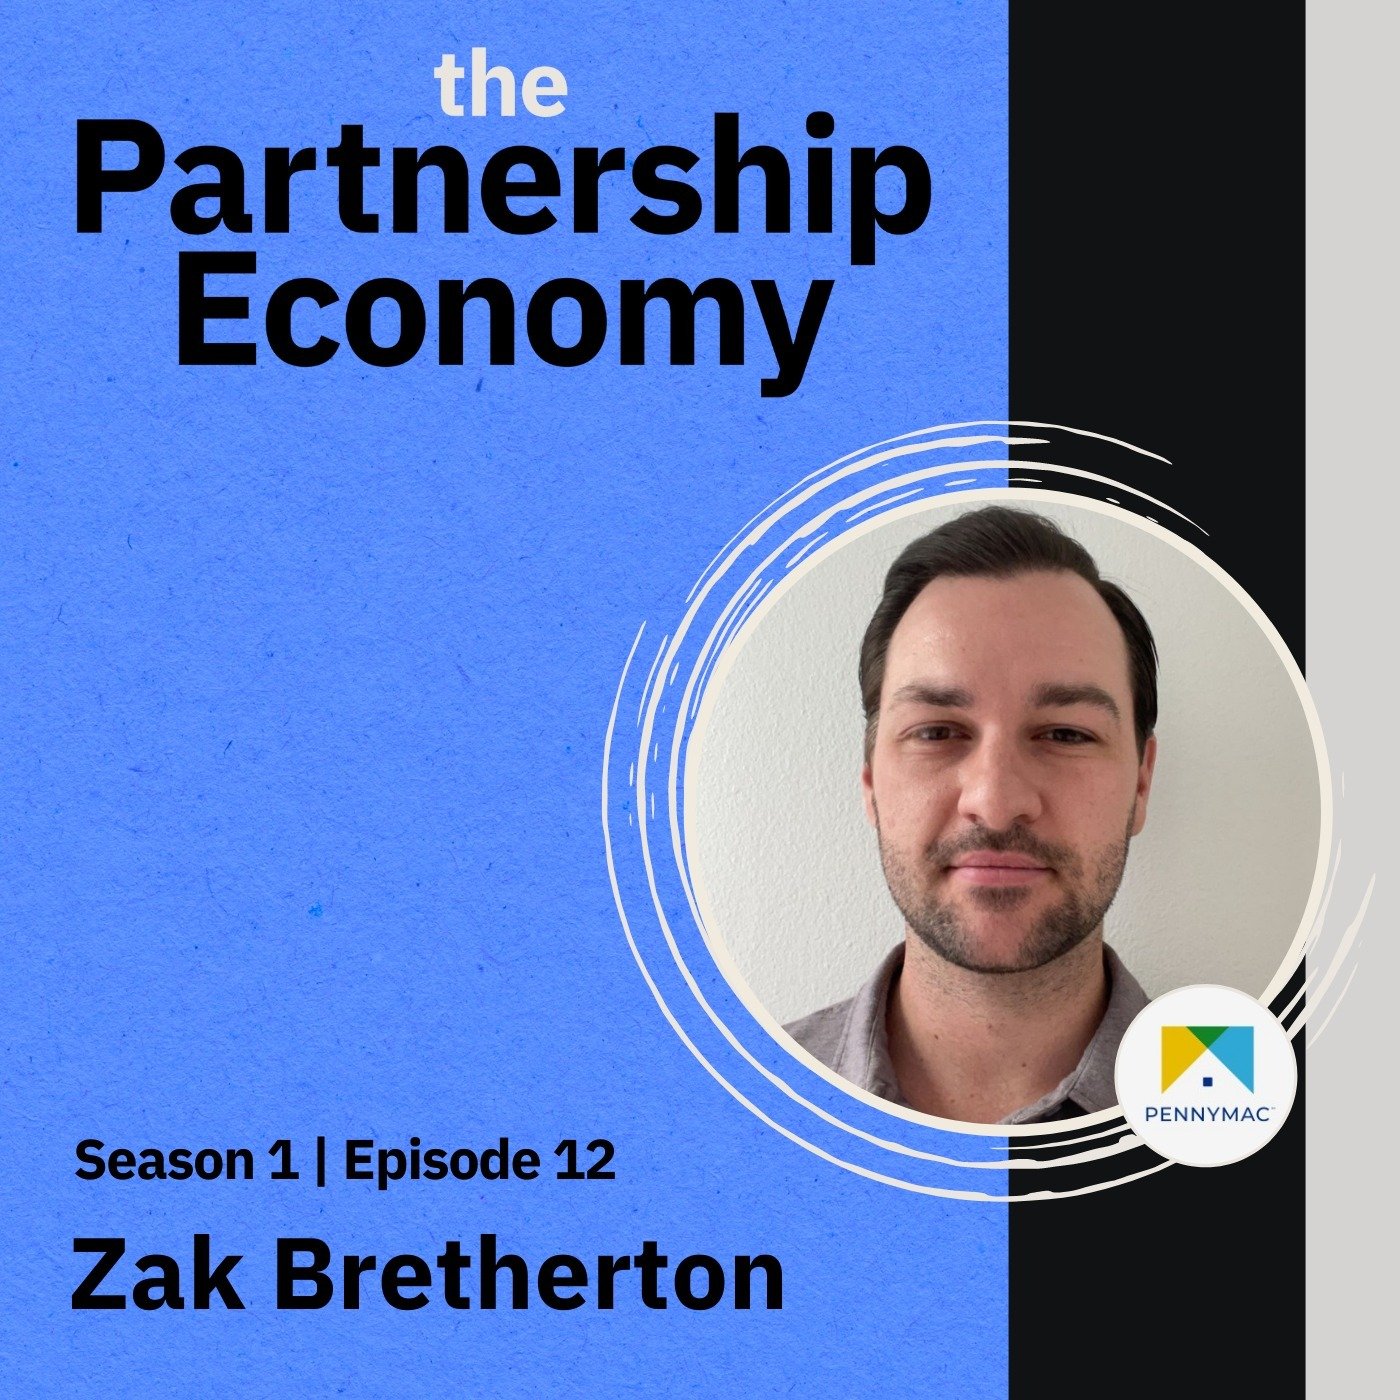 Episode cover art for Zak Bretherton, AVP of Marketing at PennyMac Loan Services, on the importance of attribution and validation through social proof